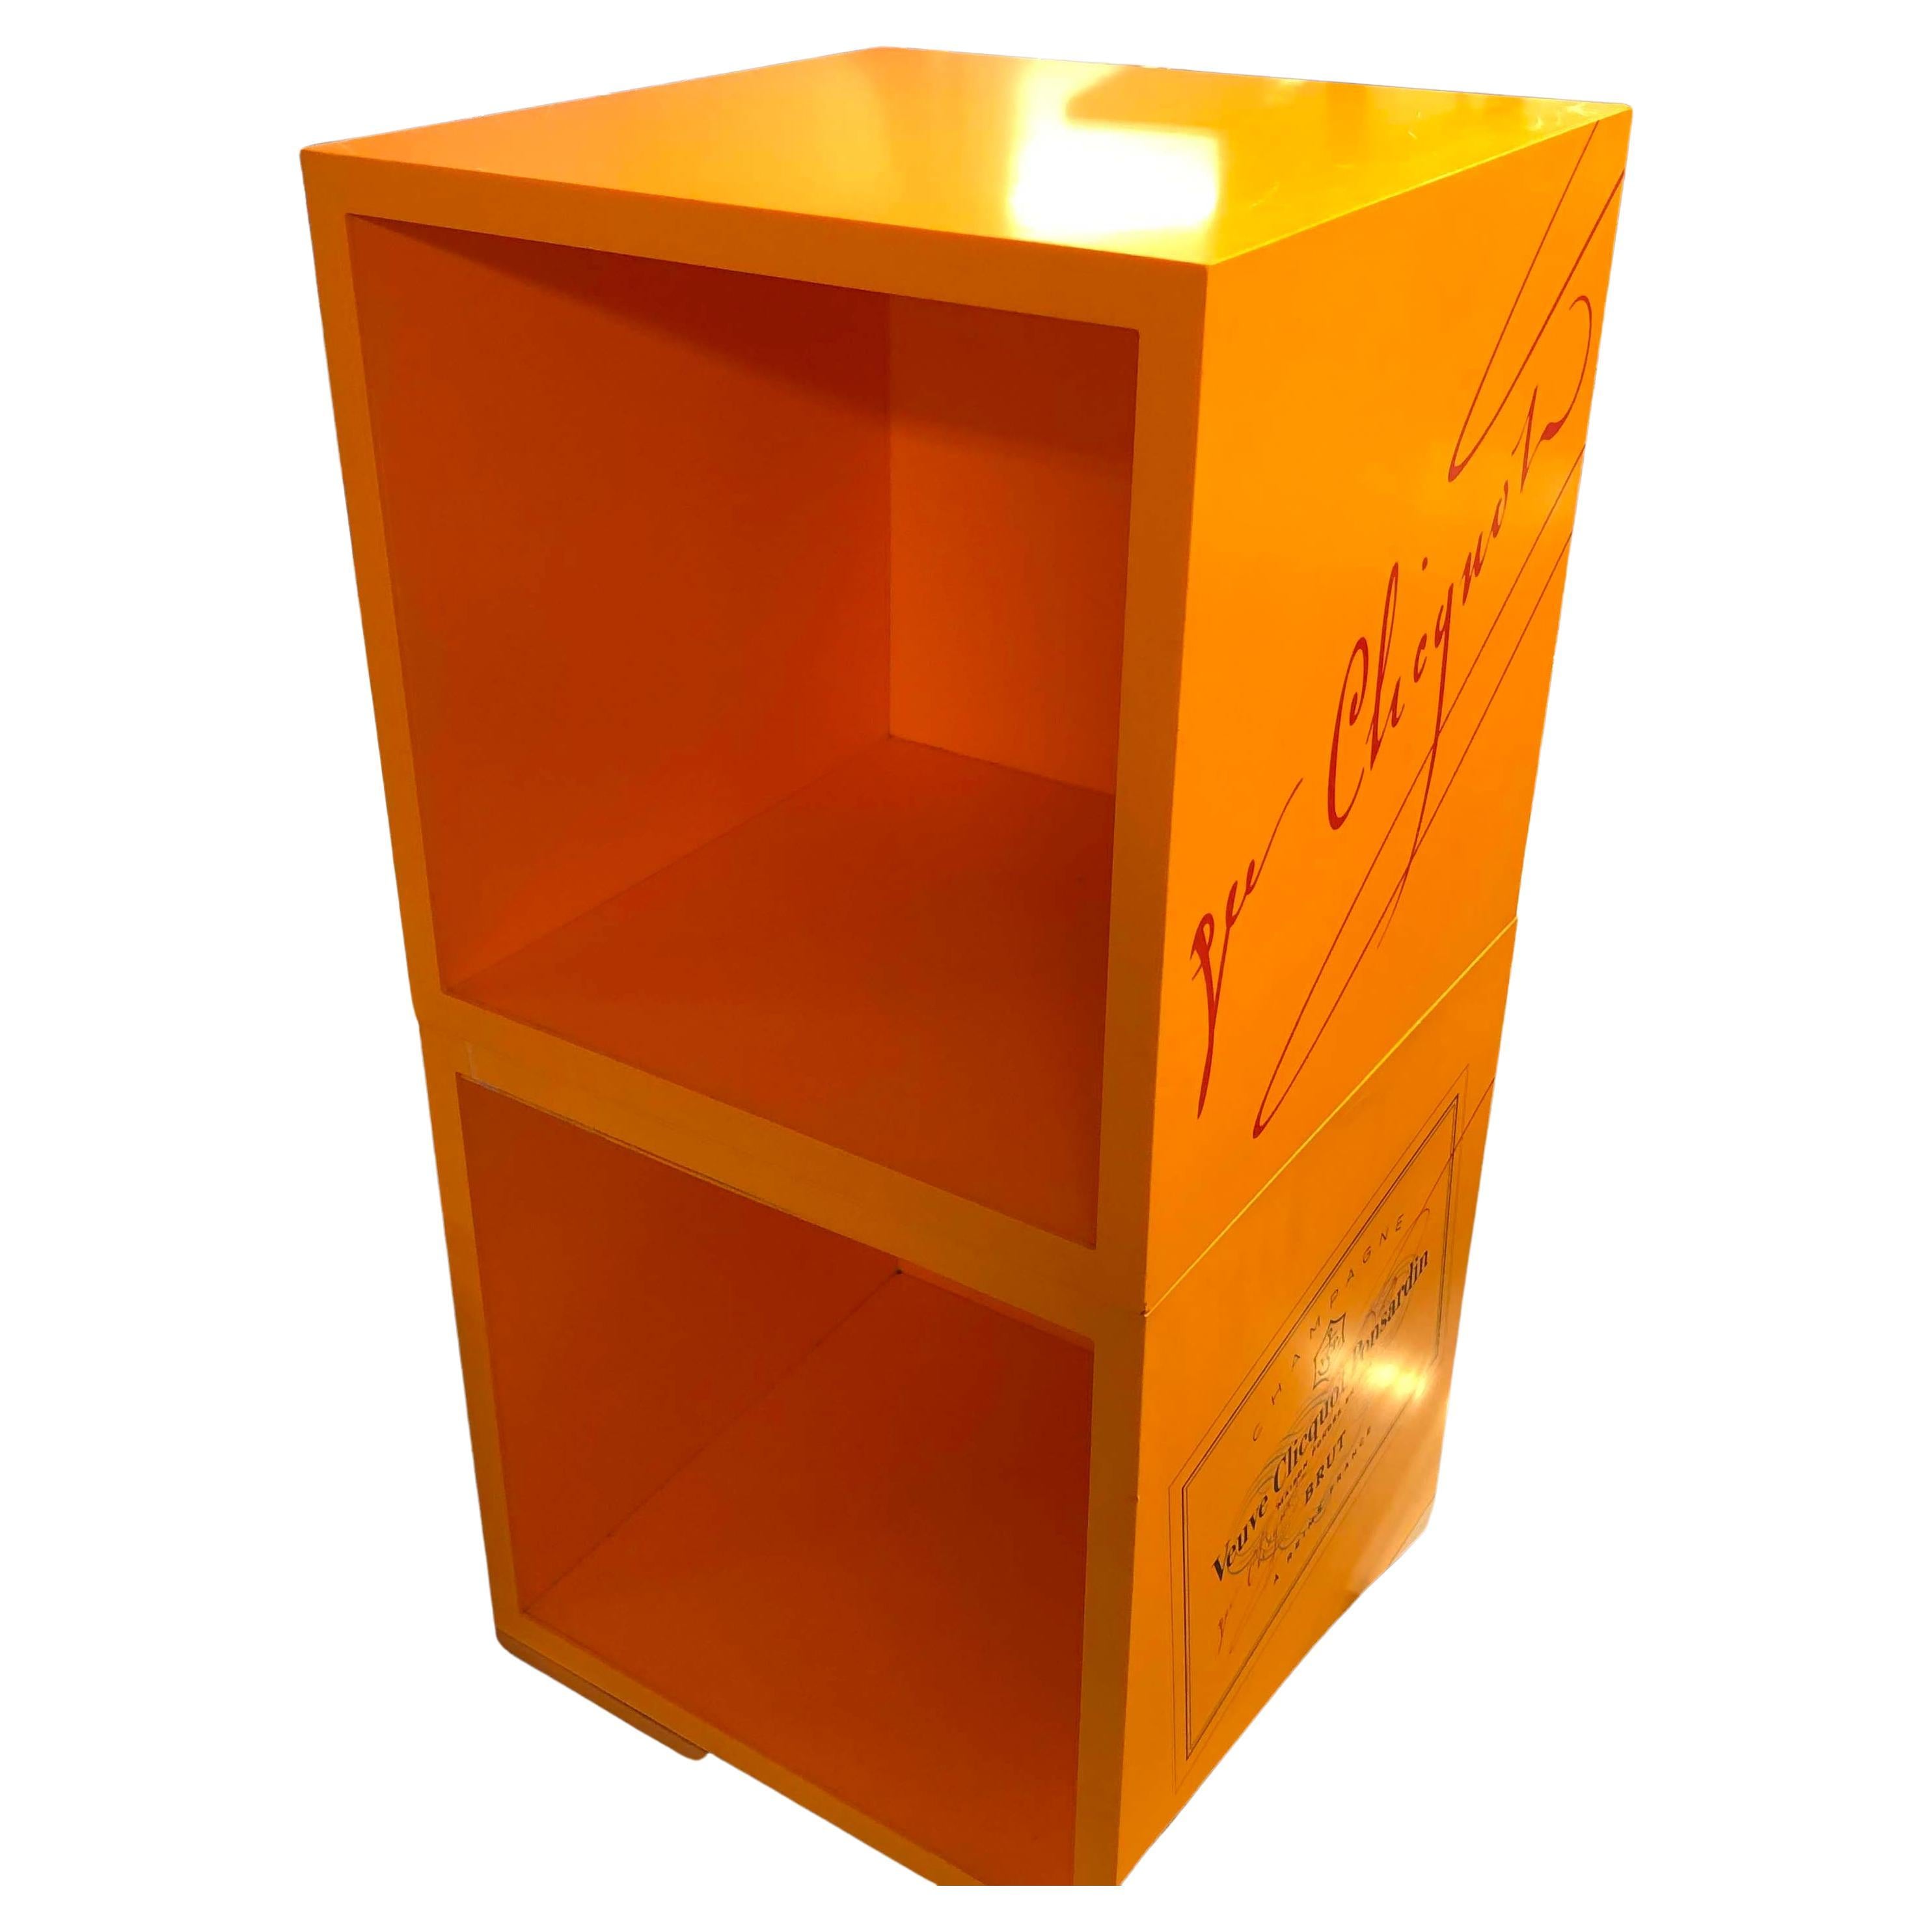 A pair of Veuve Clicquot promotional display boxes in good vintage condition. They are the perfect playful addition to any home. This piece is a color burst that cannot be resisted (champagne not included, our apologies).
